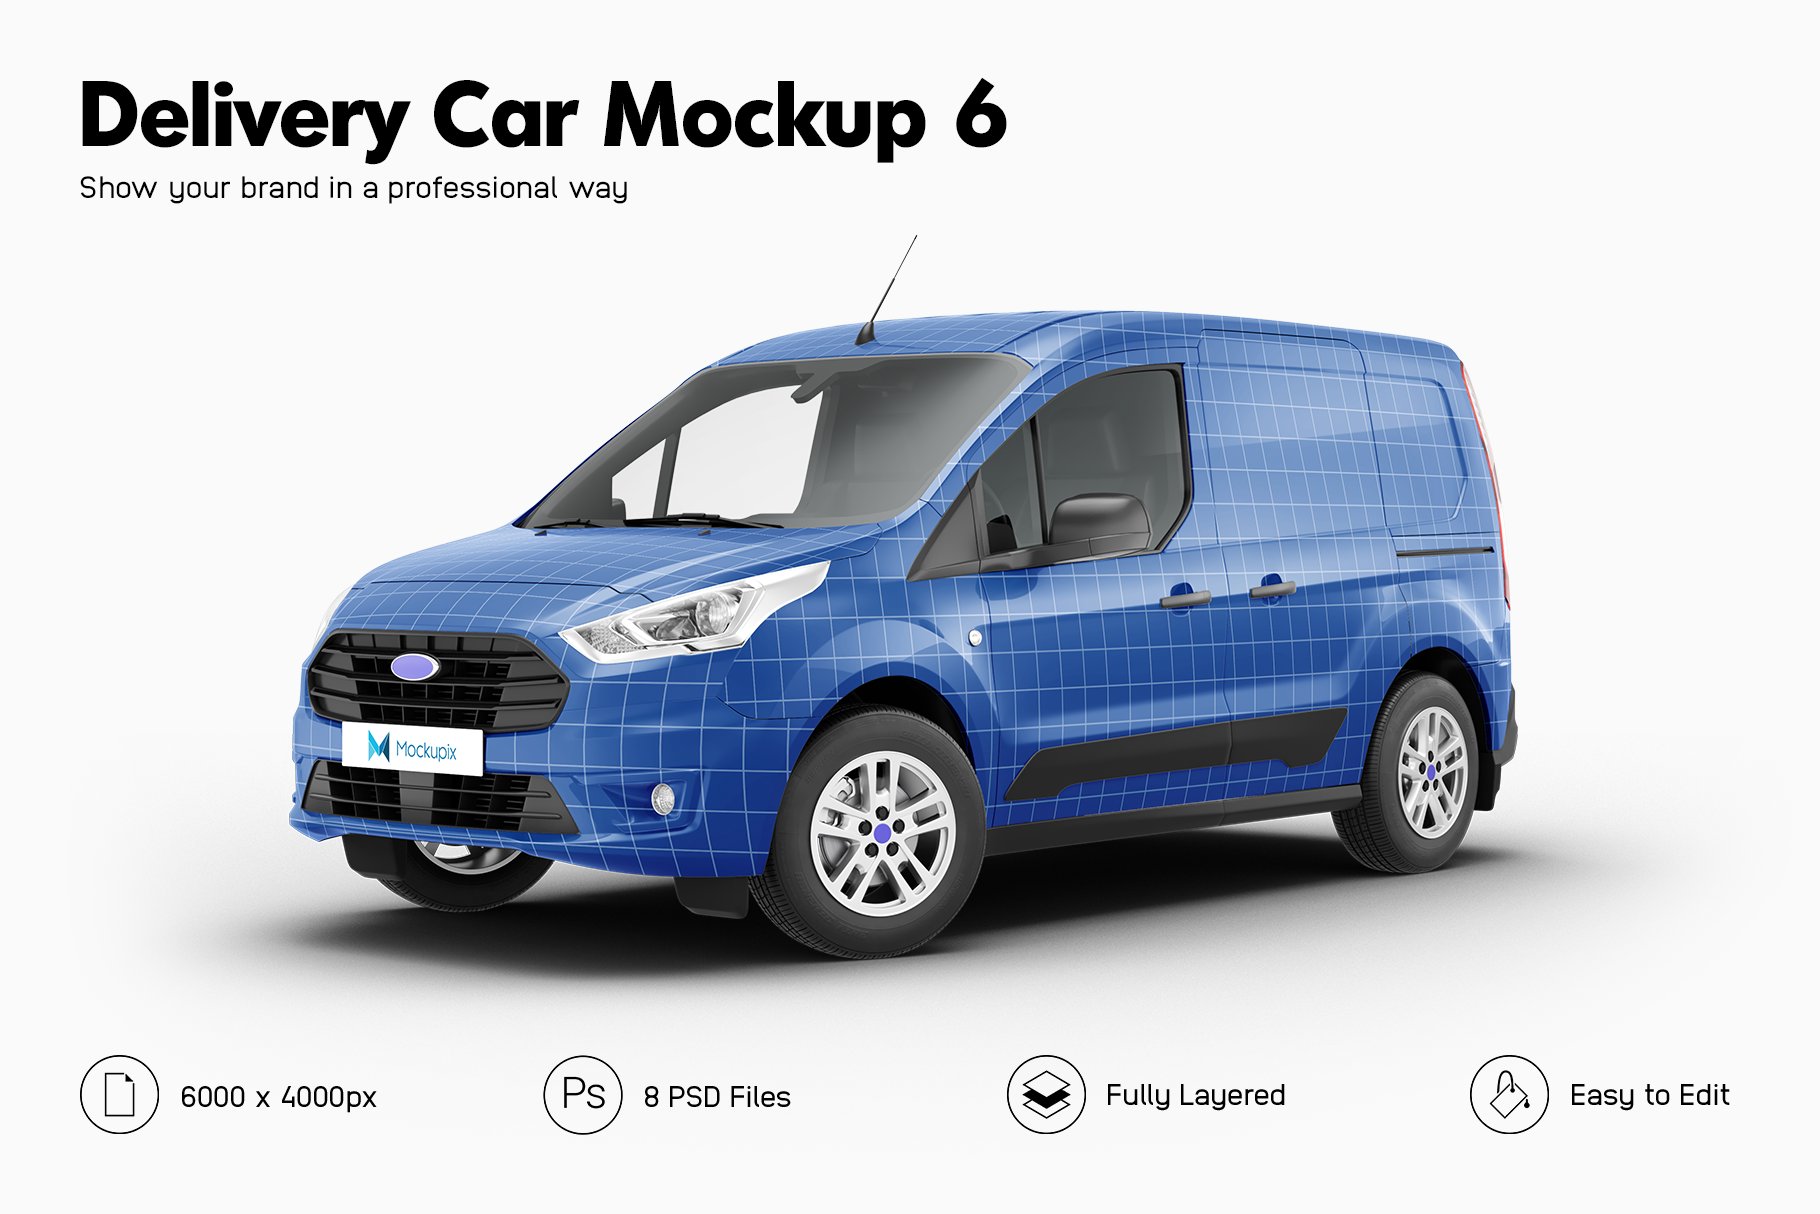 Delivery Car Mockup 6 cover image.